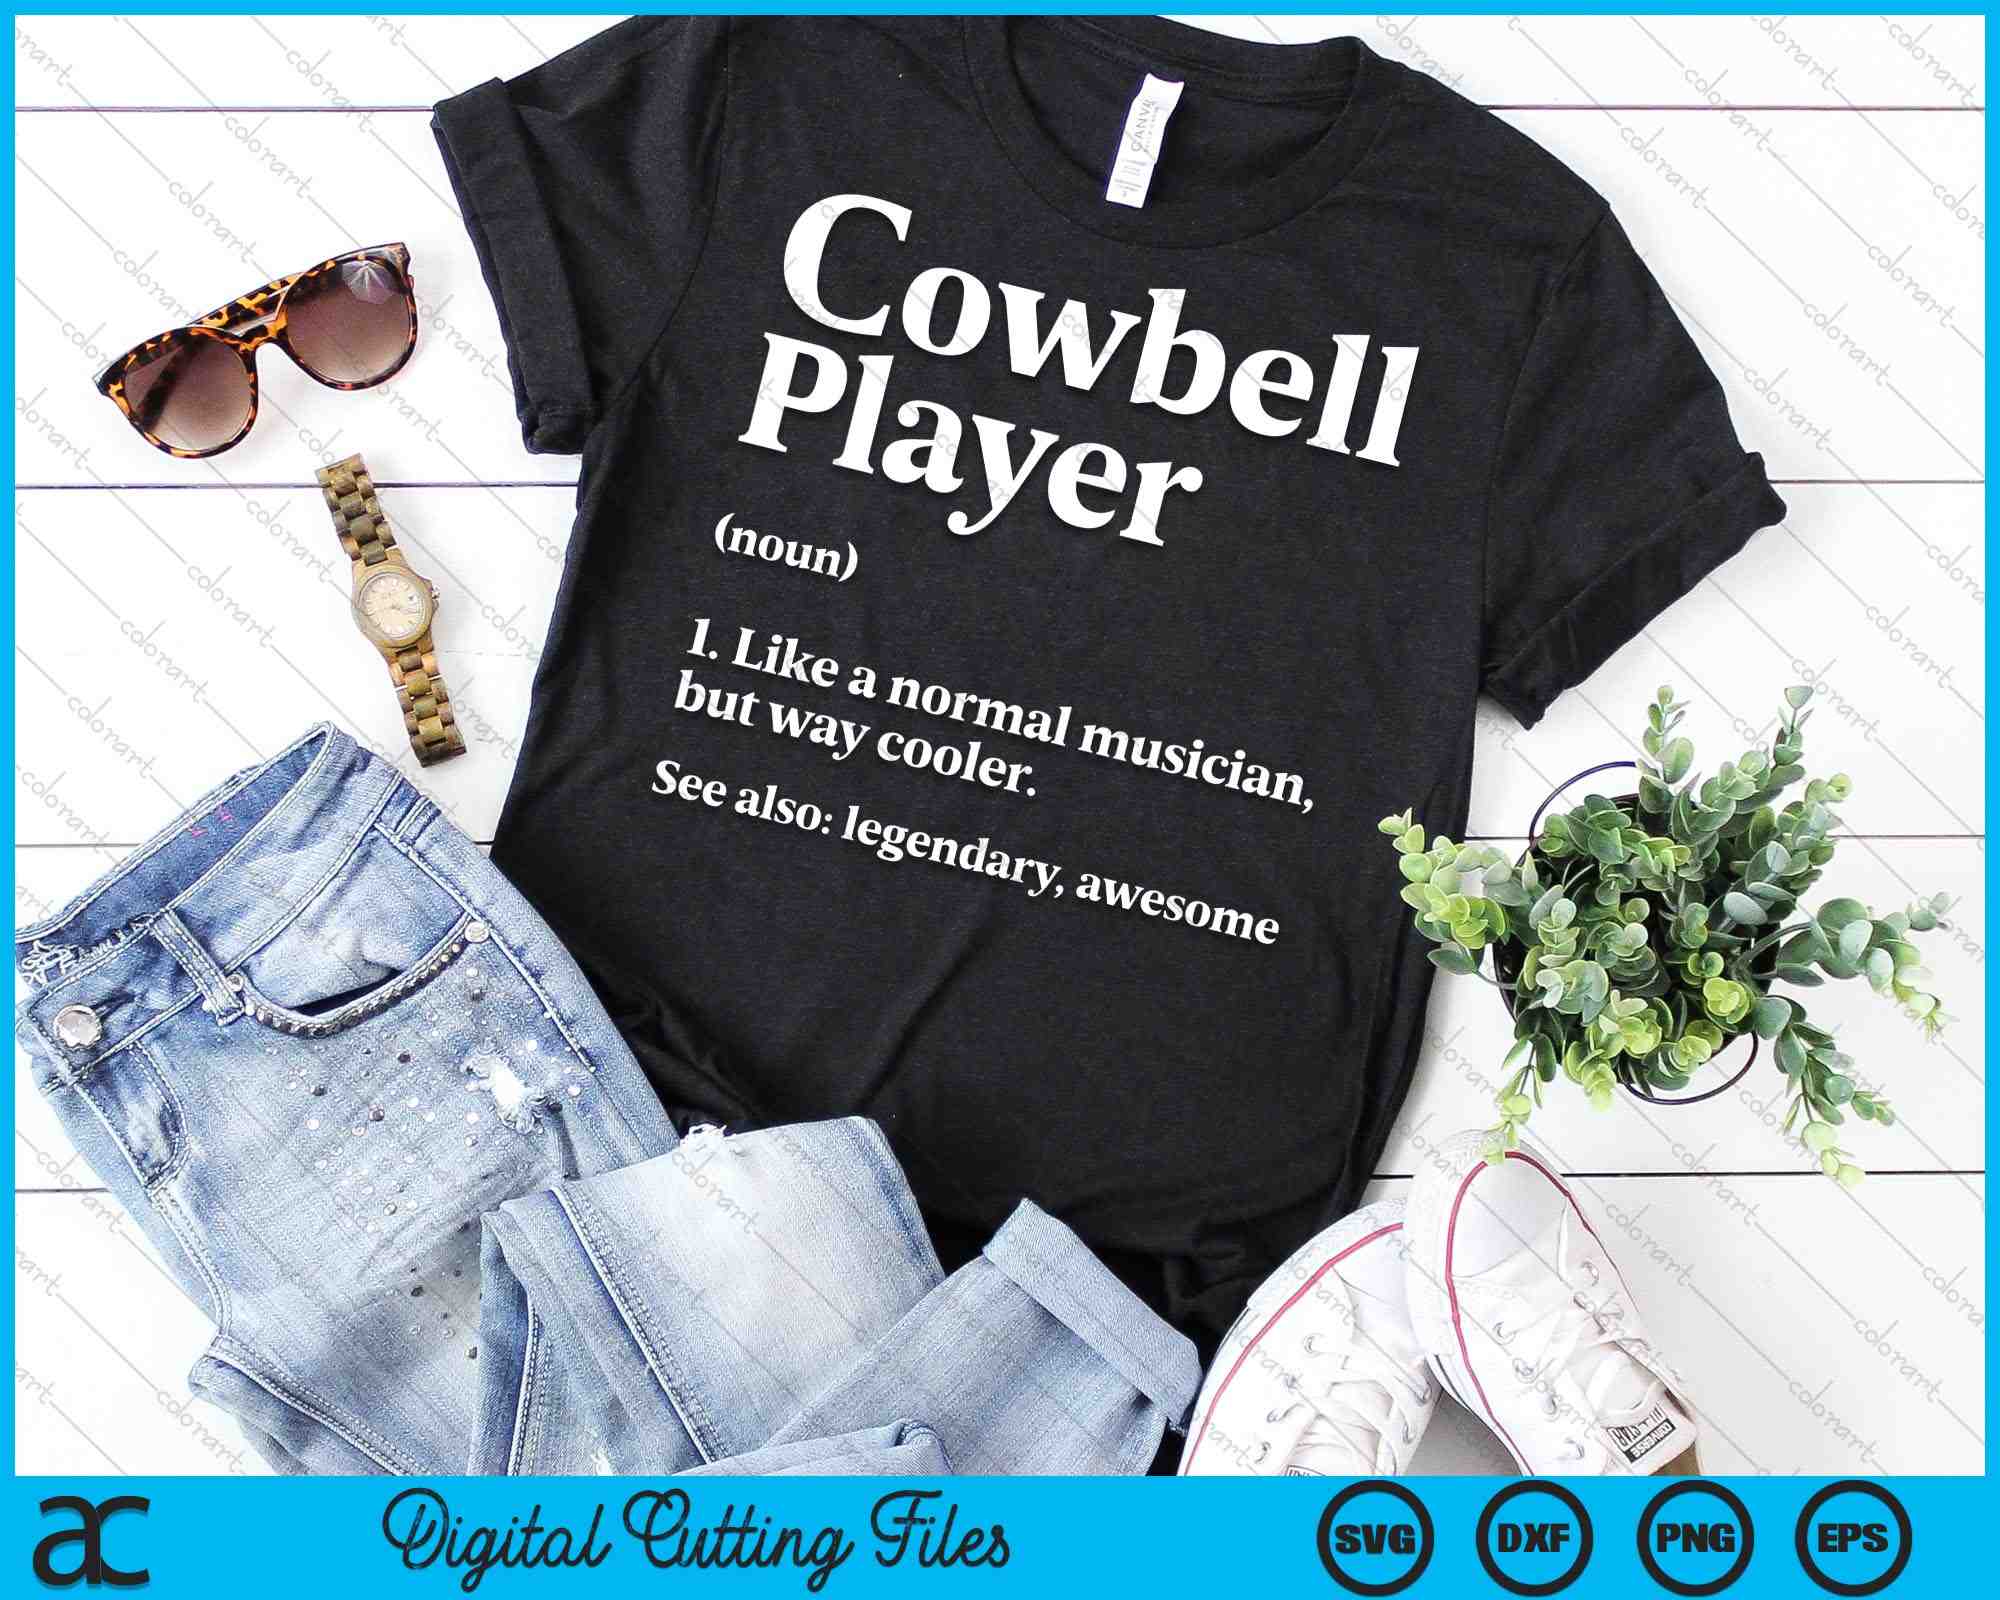 more cowbell Meaning & Origin